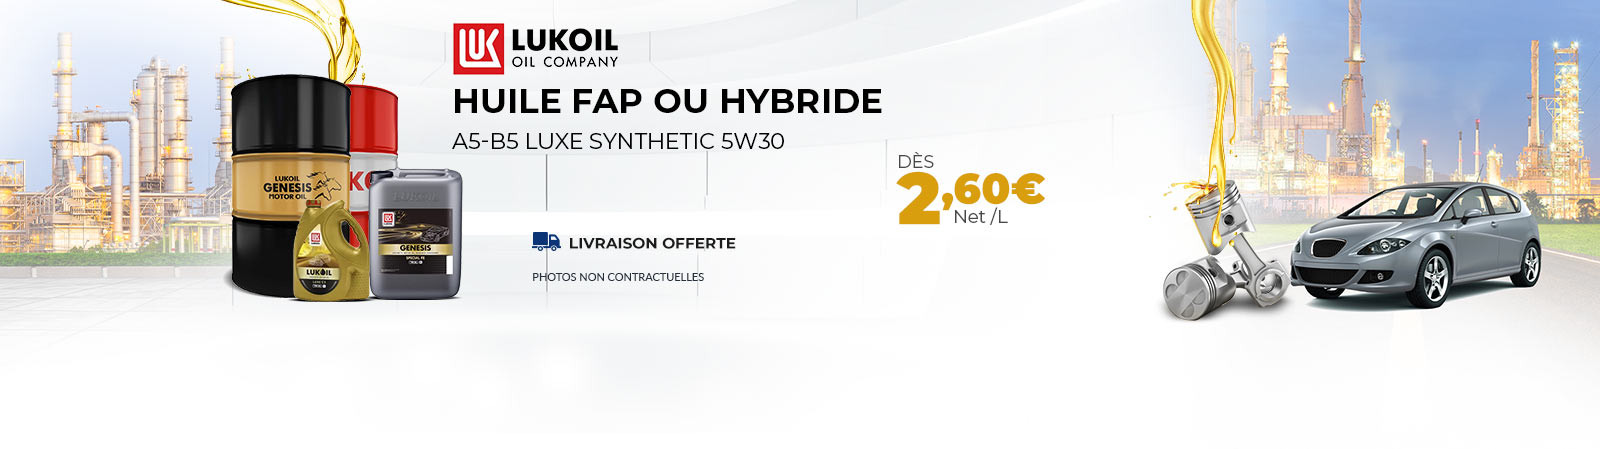 Huile moteur Luxe synthetic 5W30